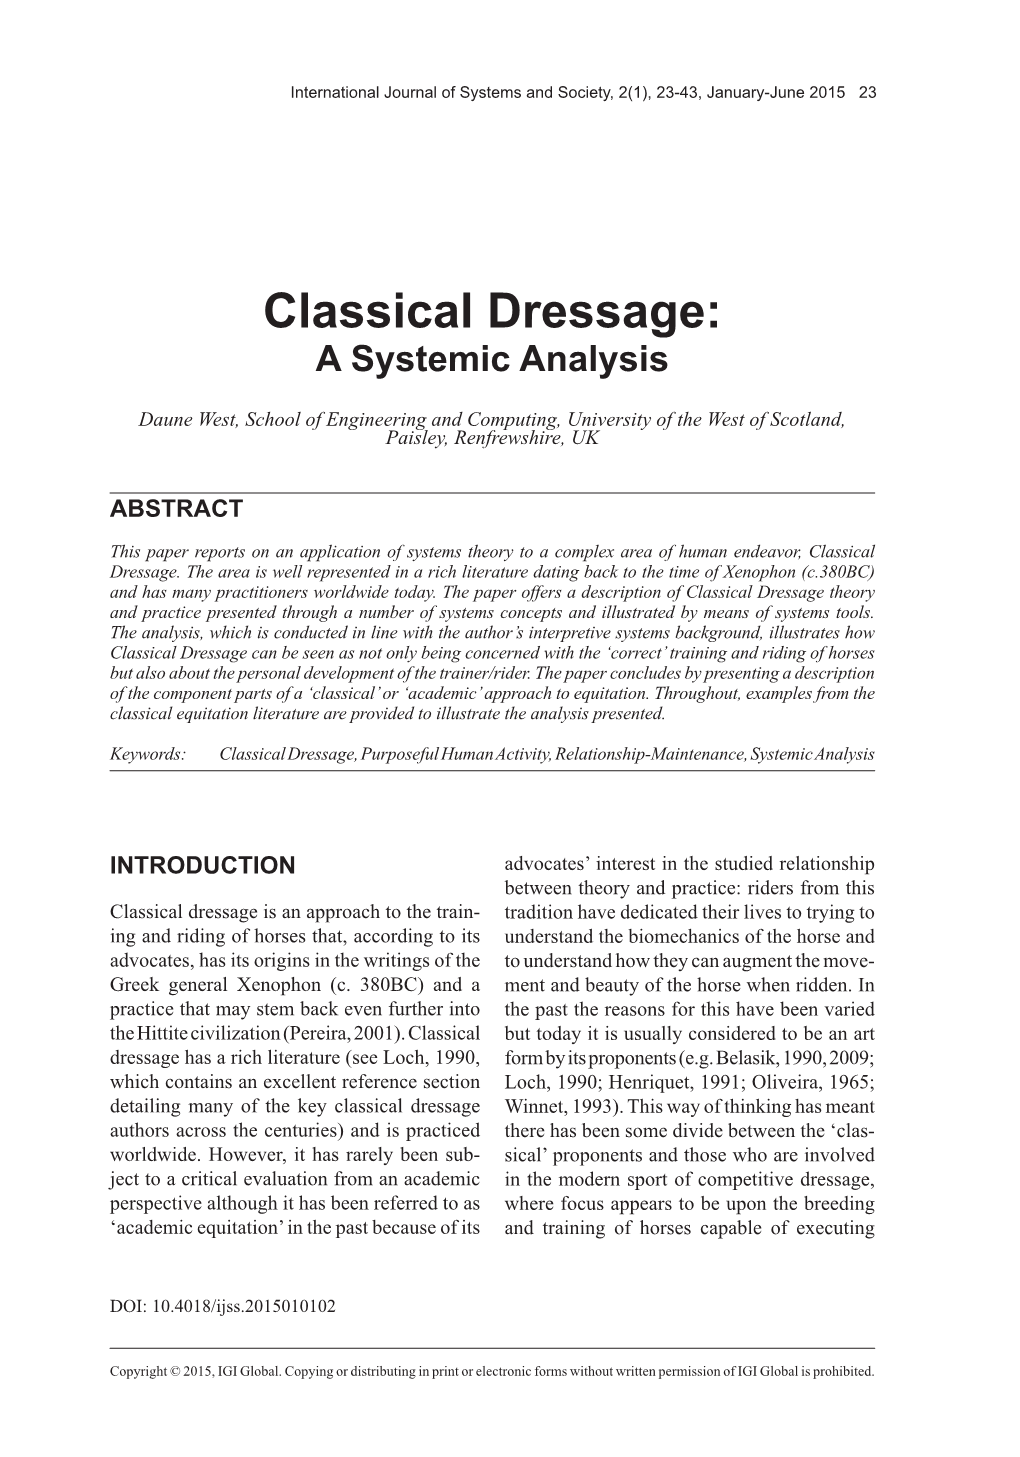 Classical Dressage: a Systemic Analysis